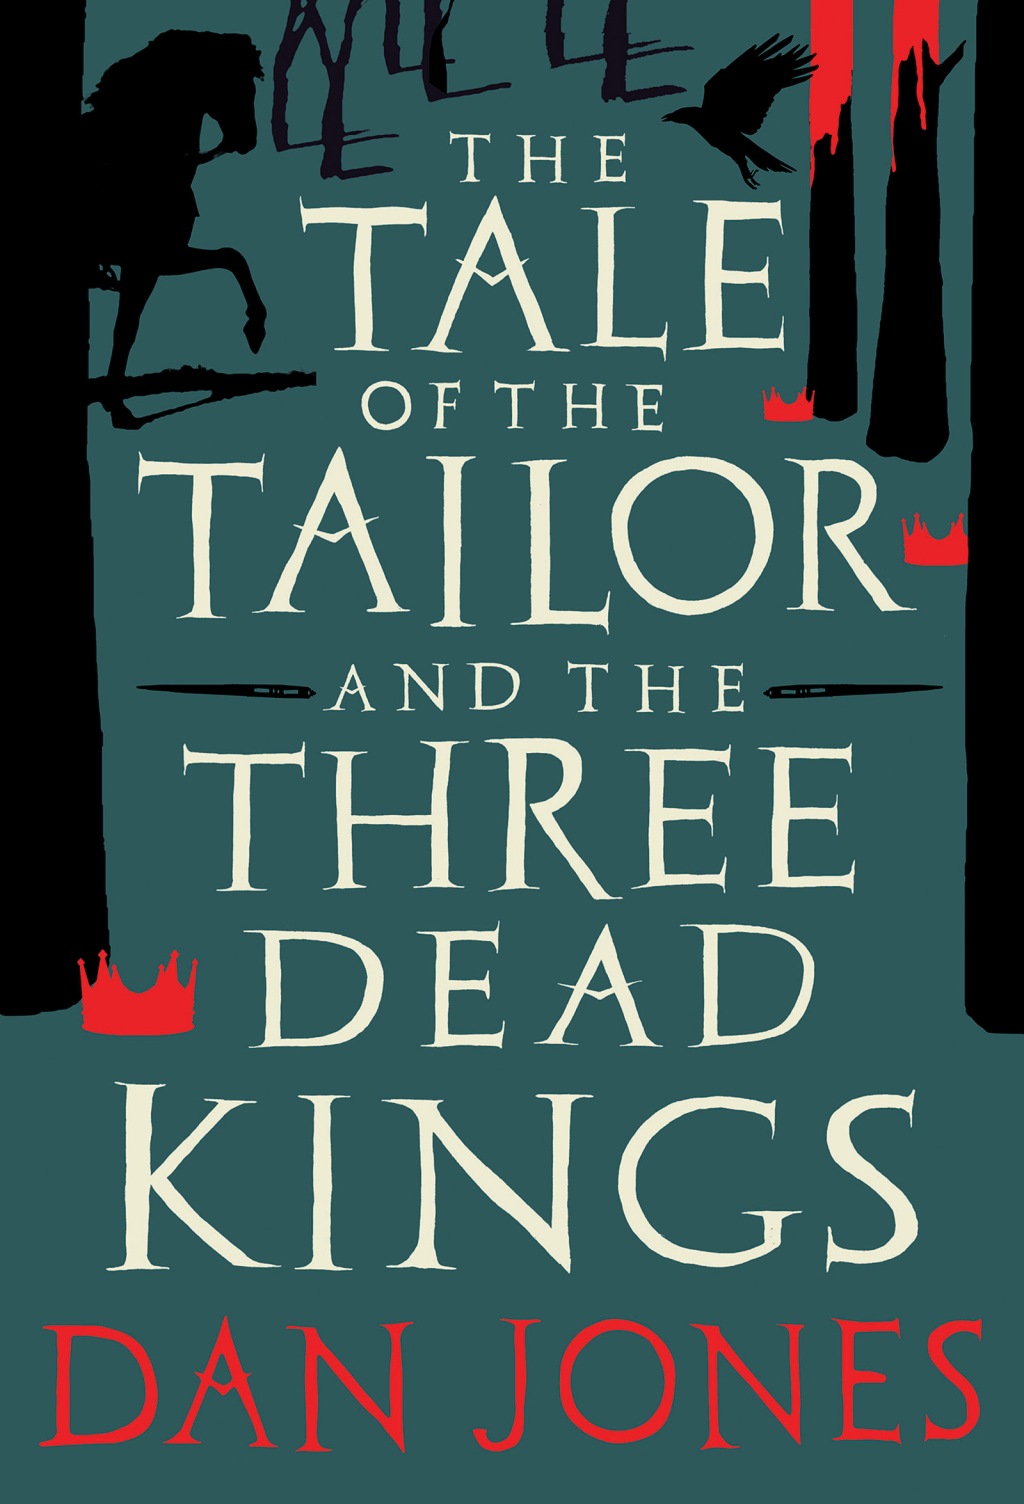 Blog Tour Review: The Tale of the Tailor and the Three Dead Kings by Dan Jones @dgjones @HoZ_Books